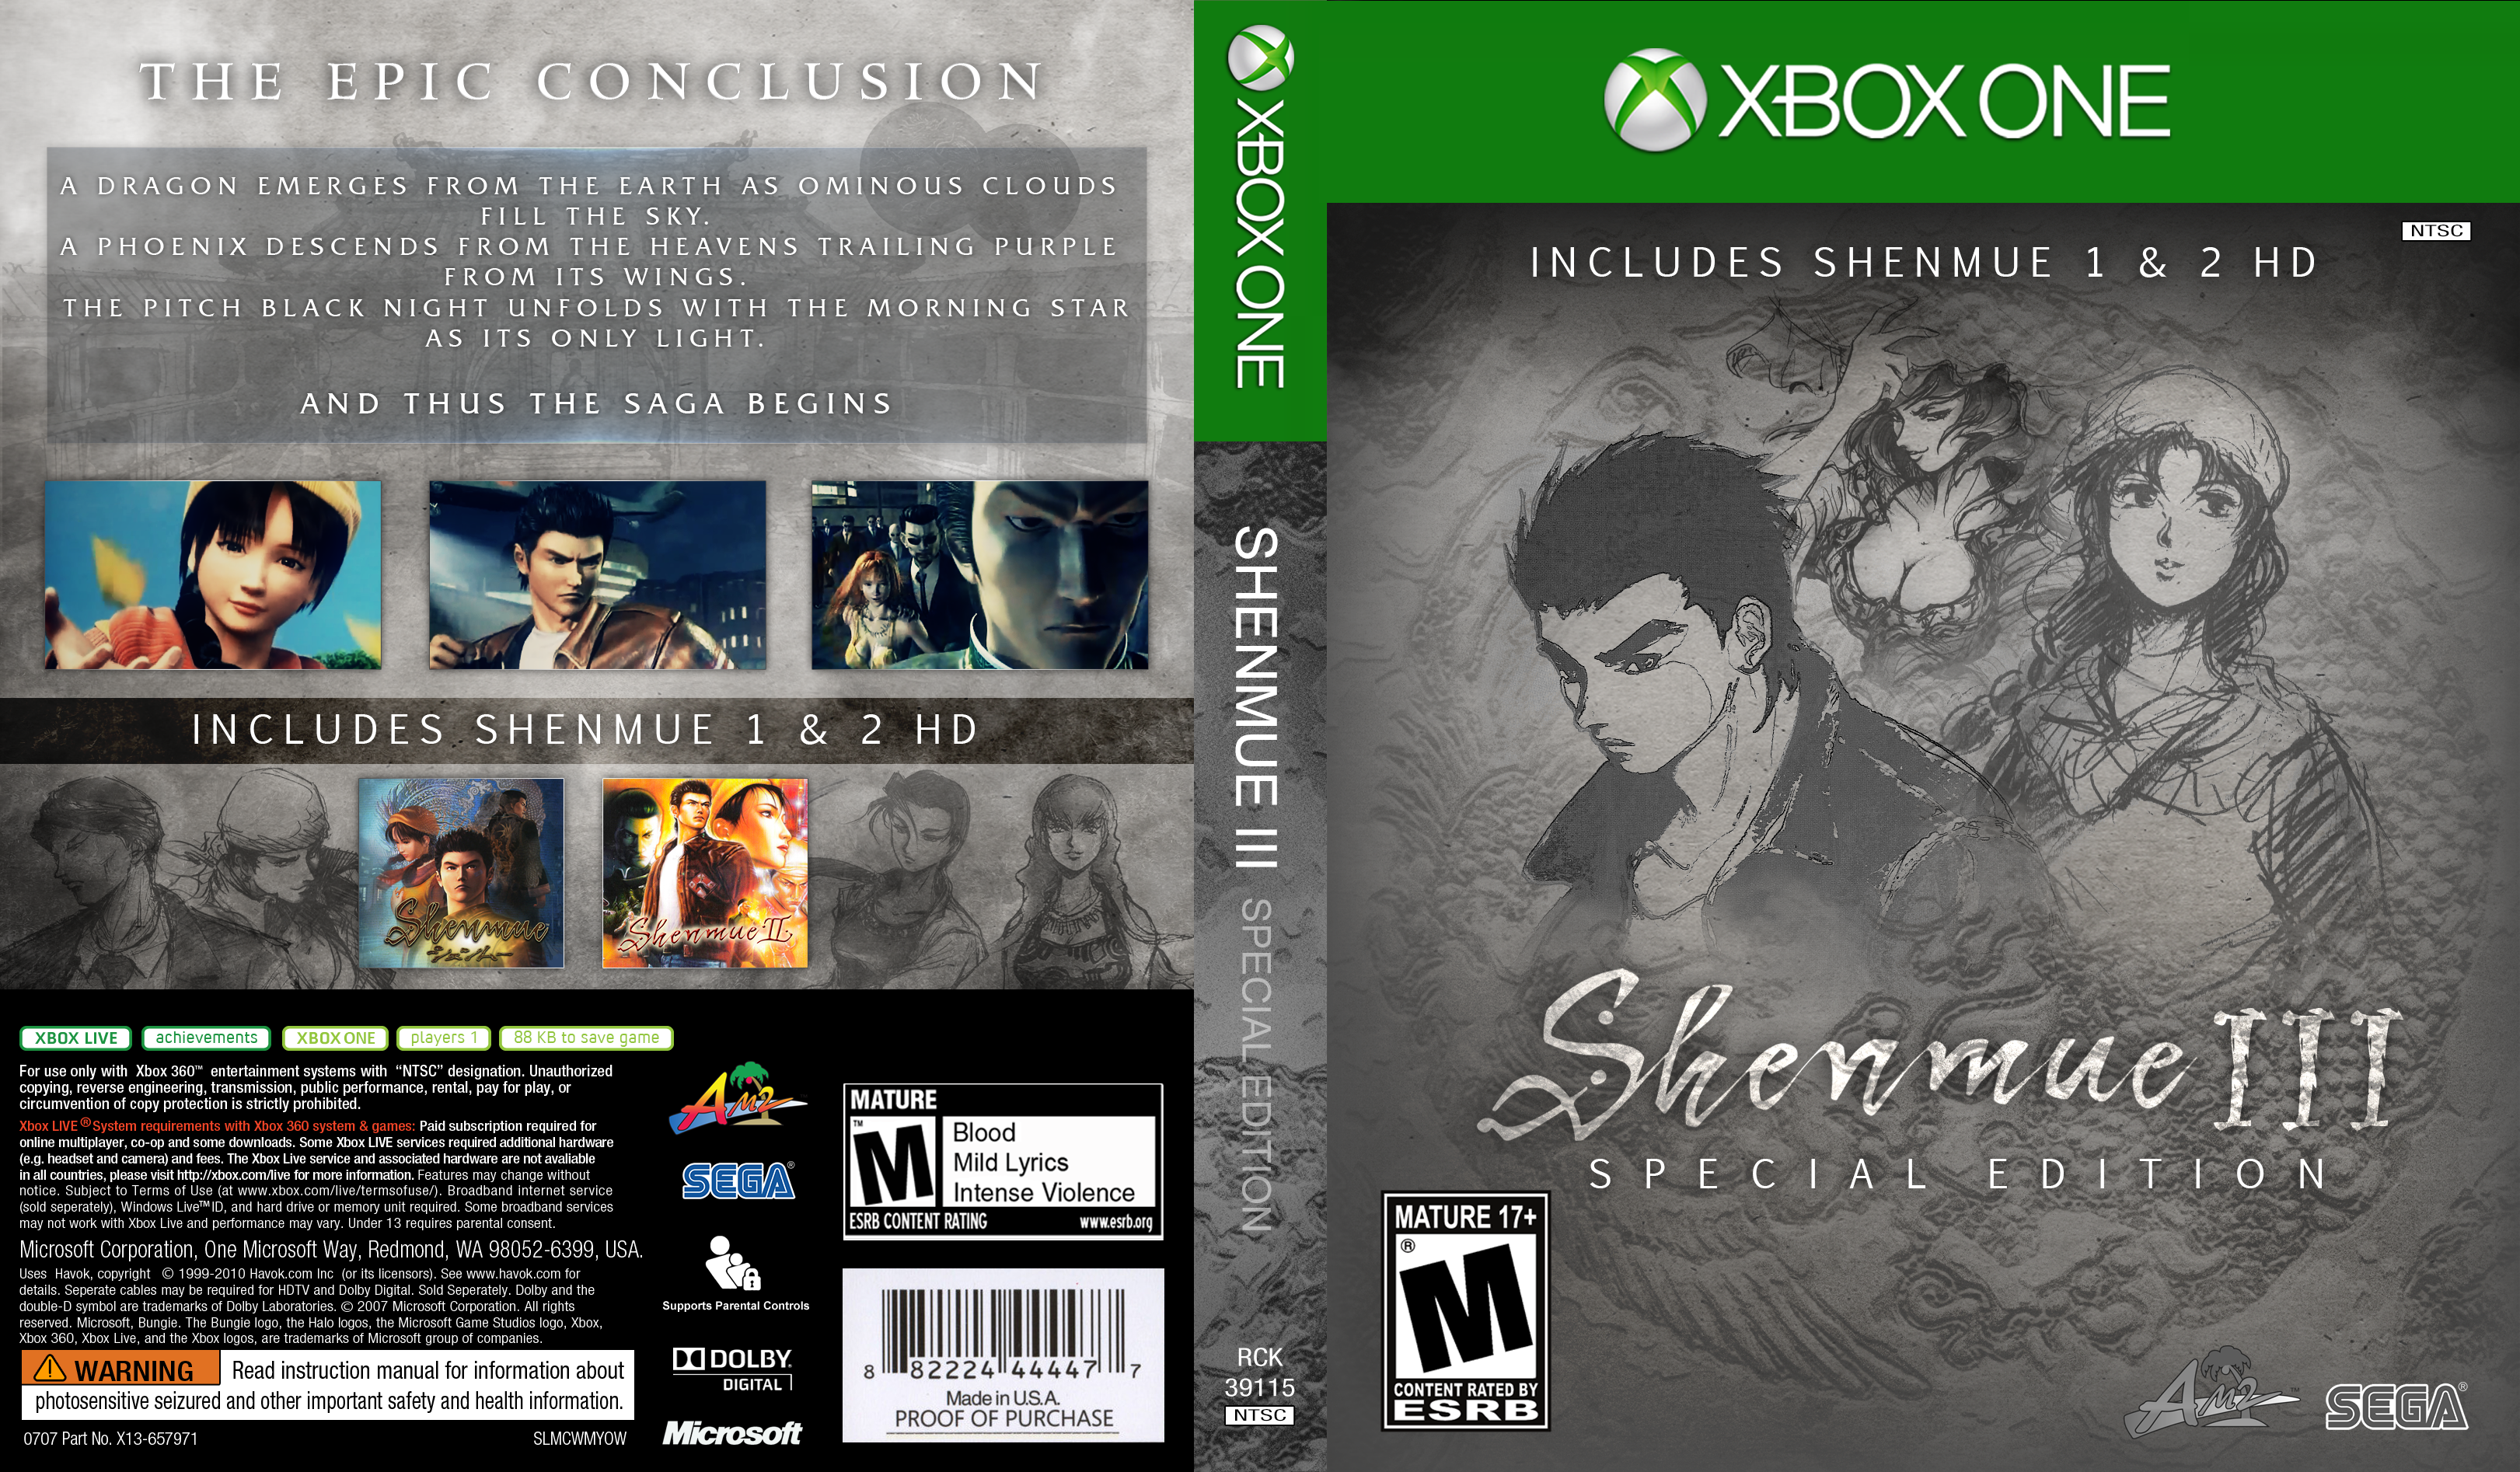 Shenmue III Special Edition box cover